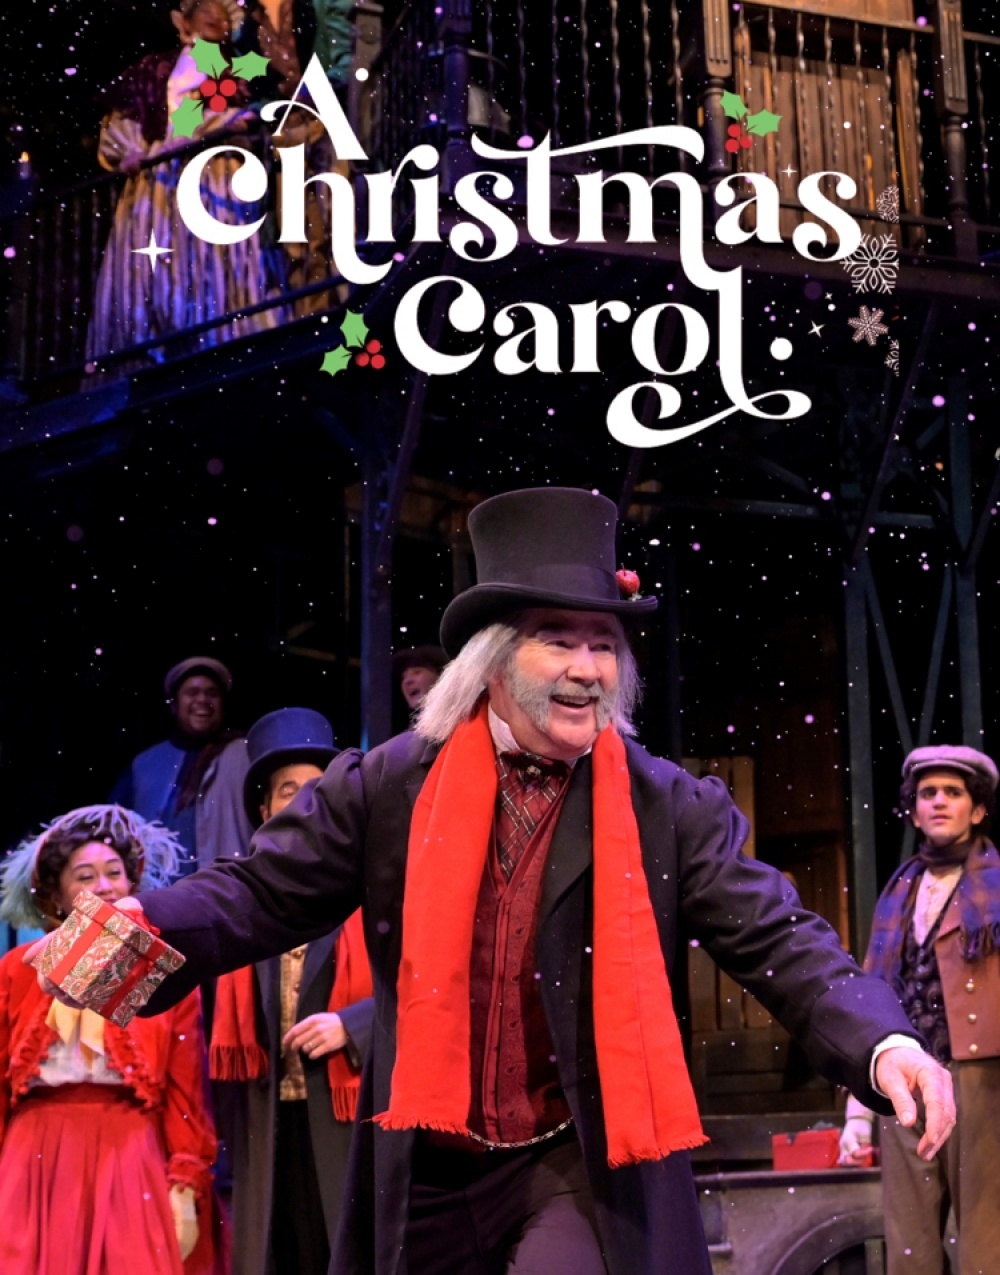 A Christmas Carol - Lesher Center for the Arts Stage Mag